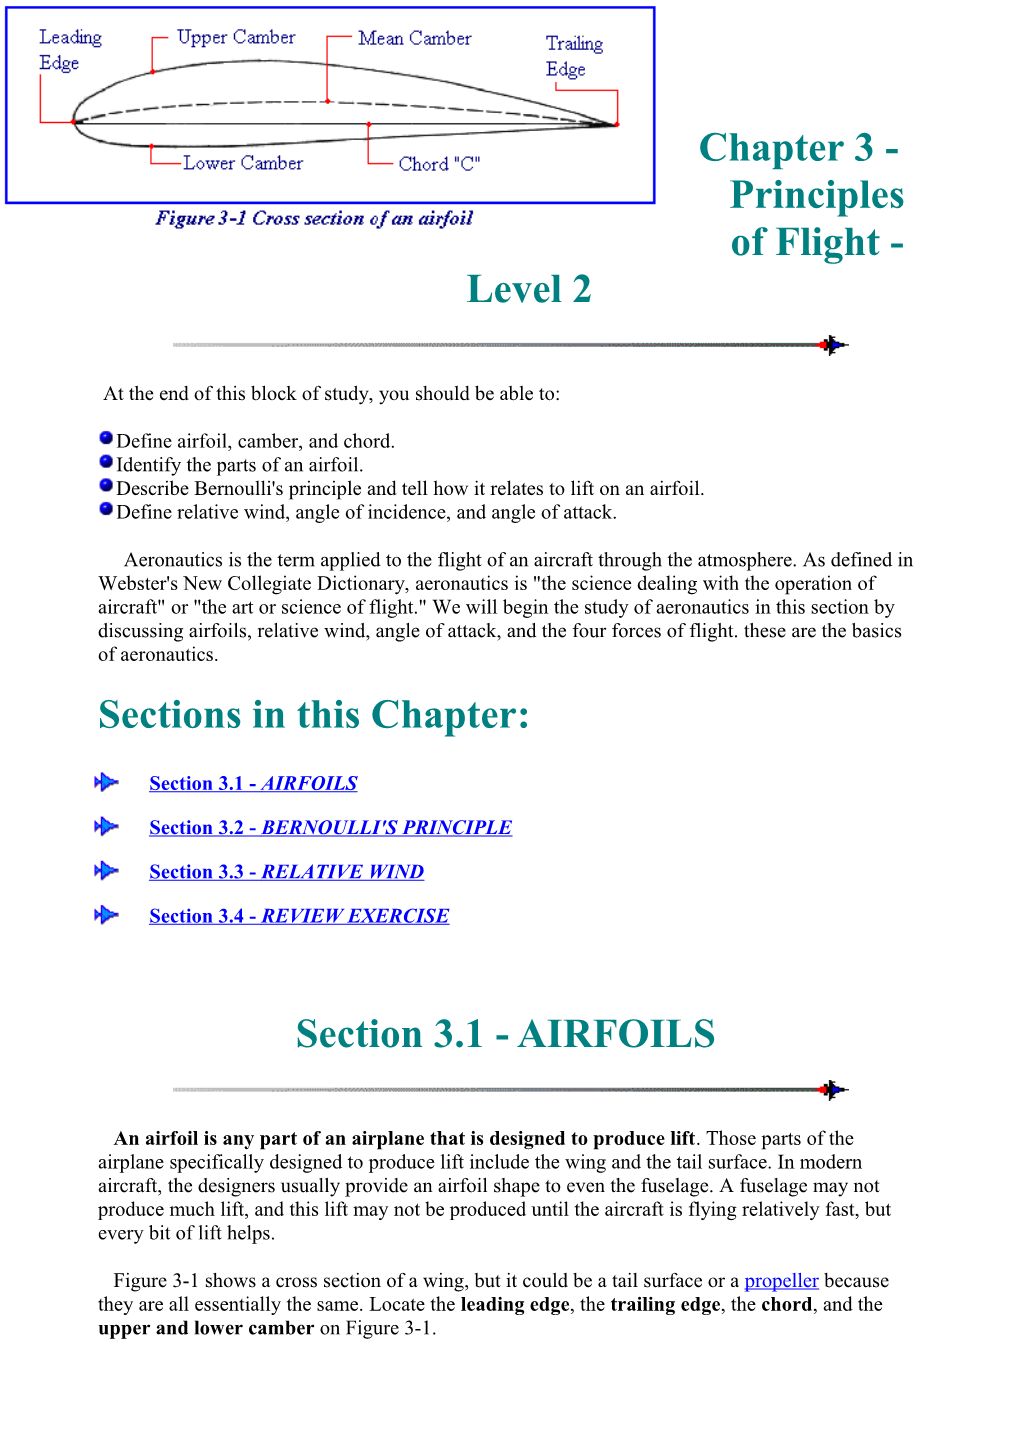 Chapter 3 - Principles of Flight - Level 2